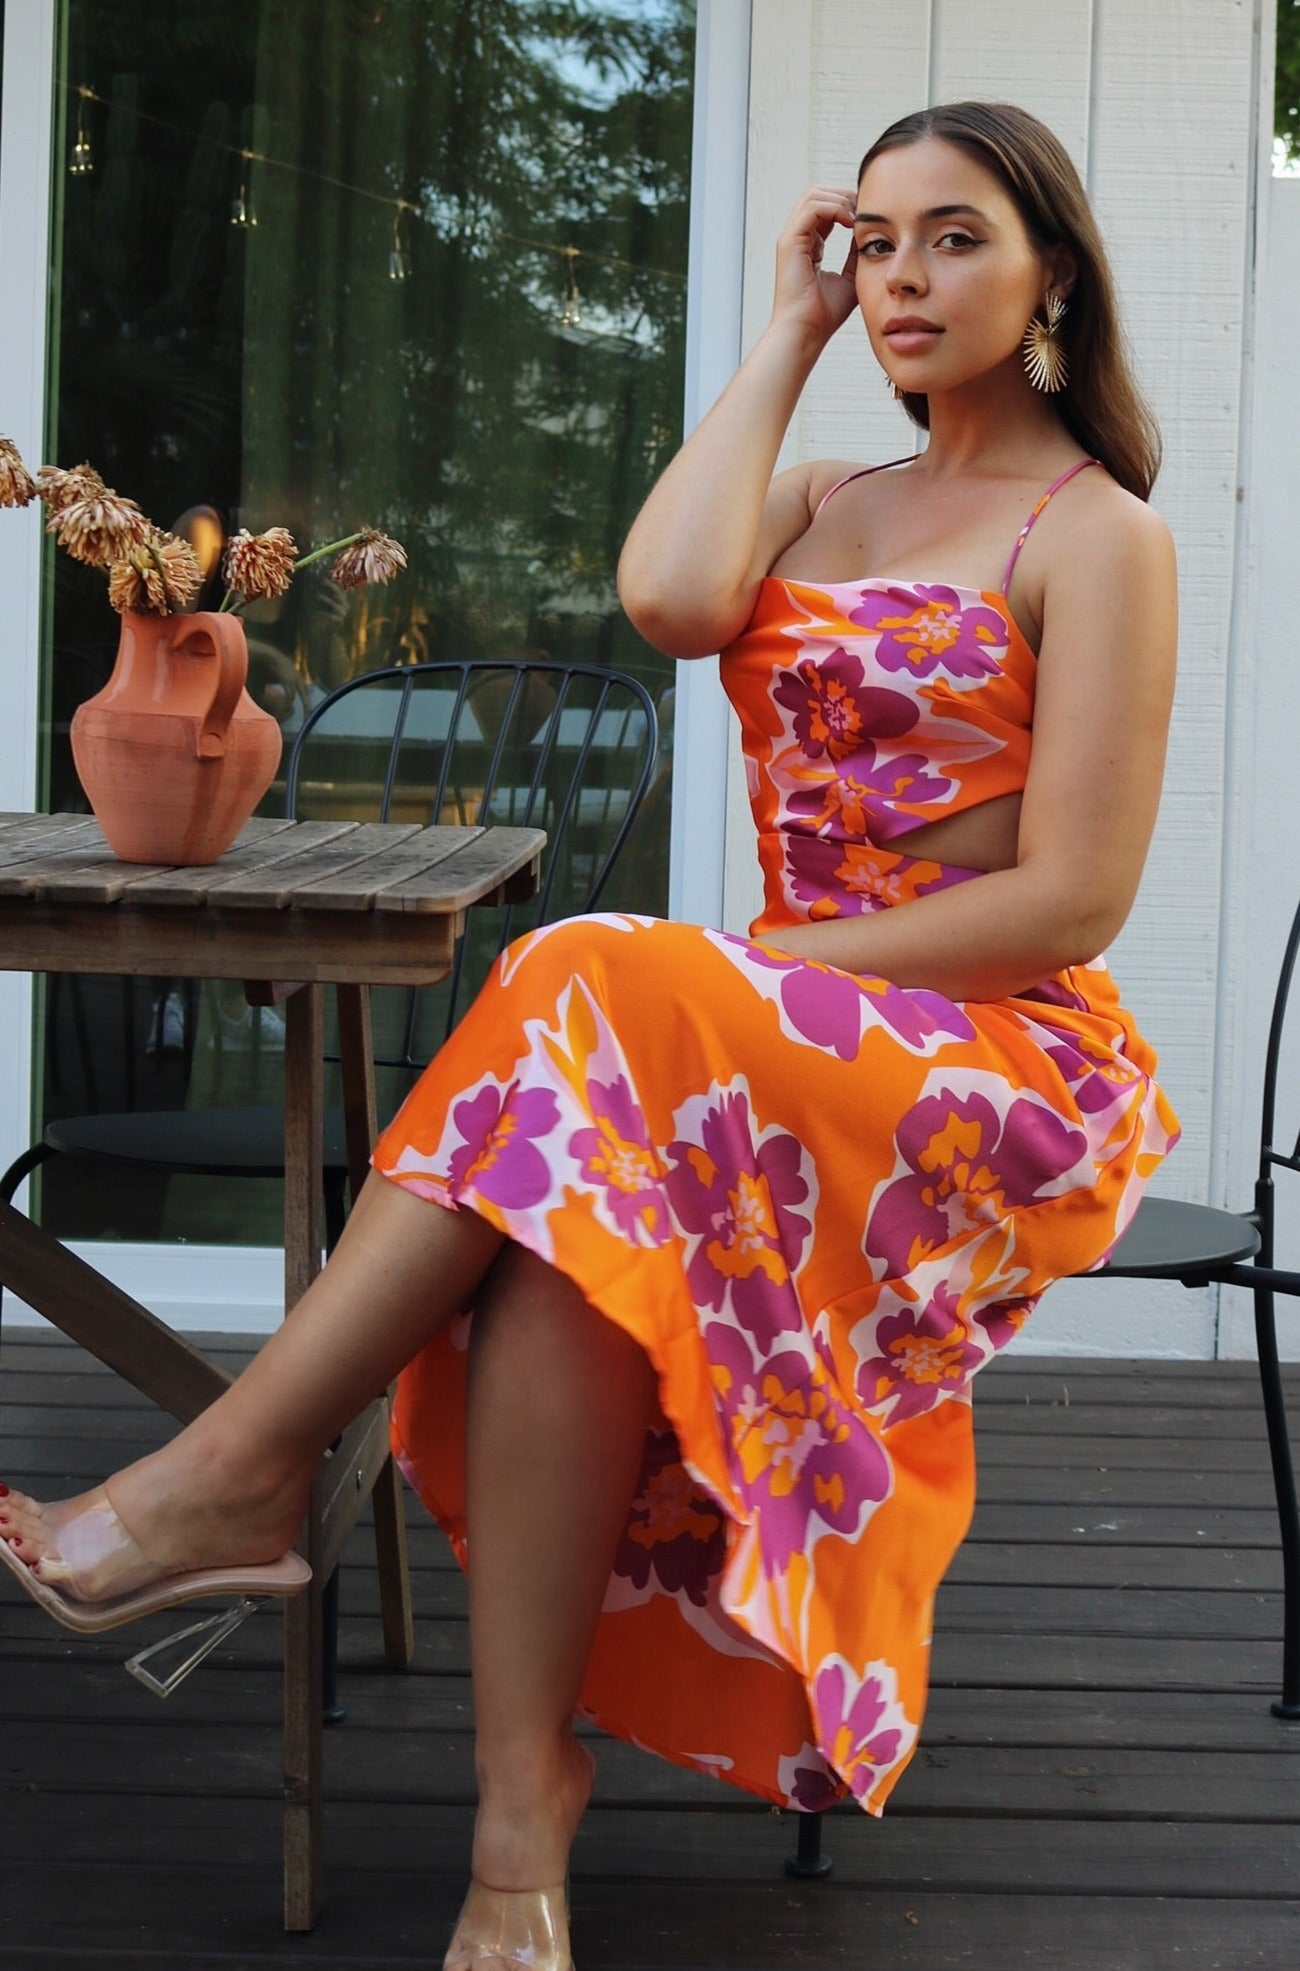 'Petunia' Halter Cut Out Midi Dress in Orange Floral. Scarlette The Label, an online fashion boutique for women.